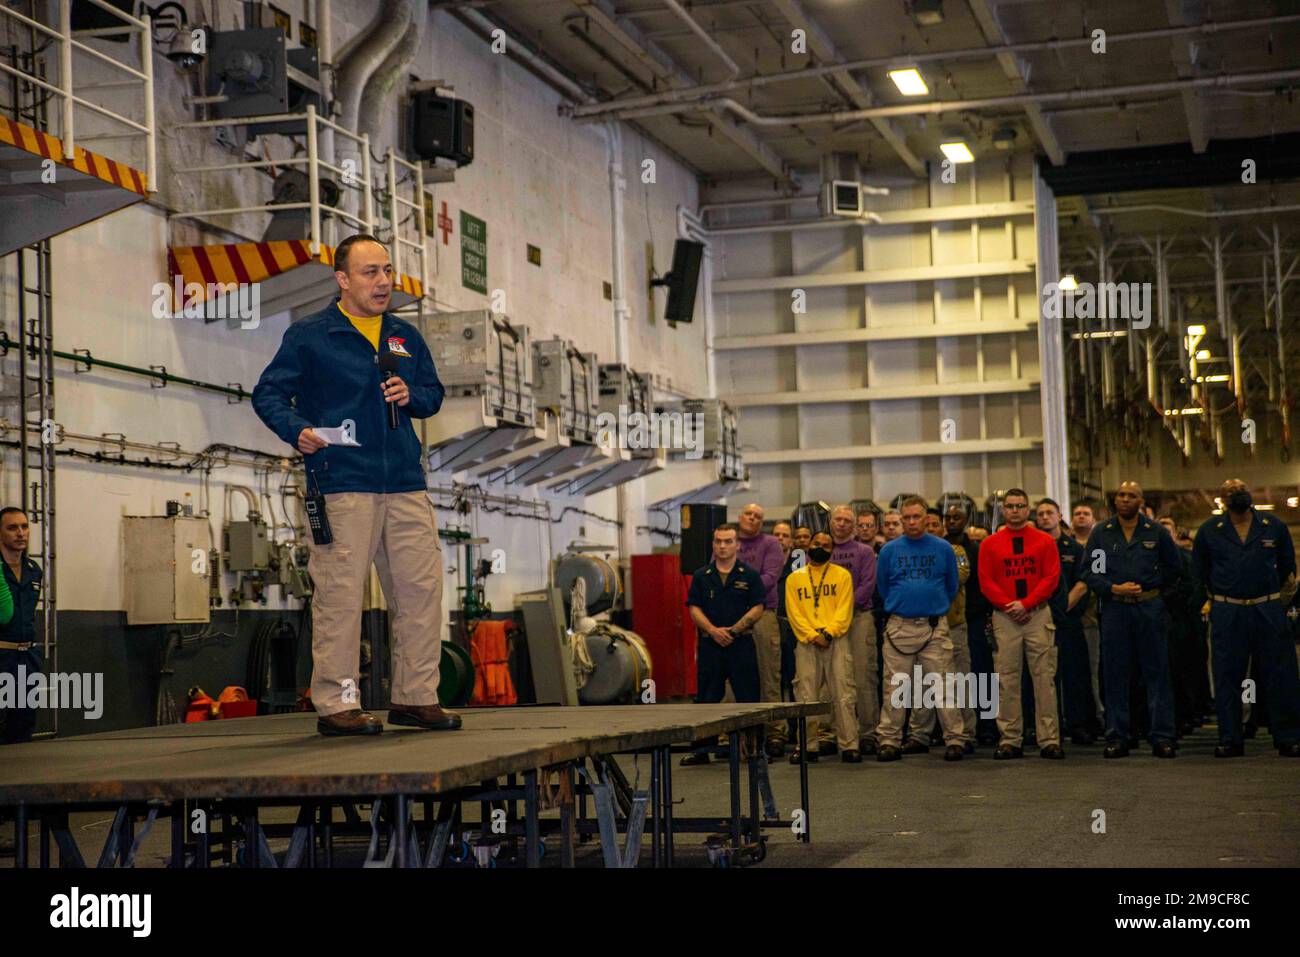 220516-N-DW158-1043 PACIFIC OCEAN (May 16, 2022) Capt. Fred Goldhammer, commanding officer of the U.S. Navy’s only forward-deployed aircraft carrier USS Ronald Reagan (CVN 76), speaks to Sailors during an all-hands call in the hangar bay. Ronald Reagan’s command team conducts all-hands calls to announce upcoming events, schedule changes, or important public service announcements to the ship’s crew. Ronald Reagan, the flagship of Carrier Strike Group 5, provides a combat-ready force that protects and defends the United States, and supports alliances, partnerships and collective maritime interes Stock Photo